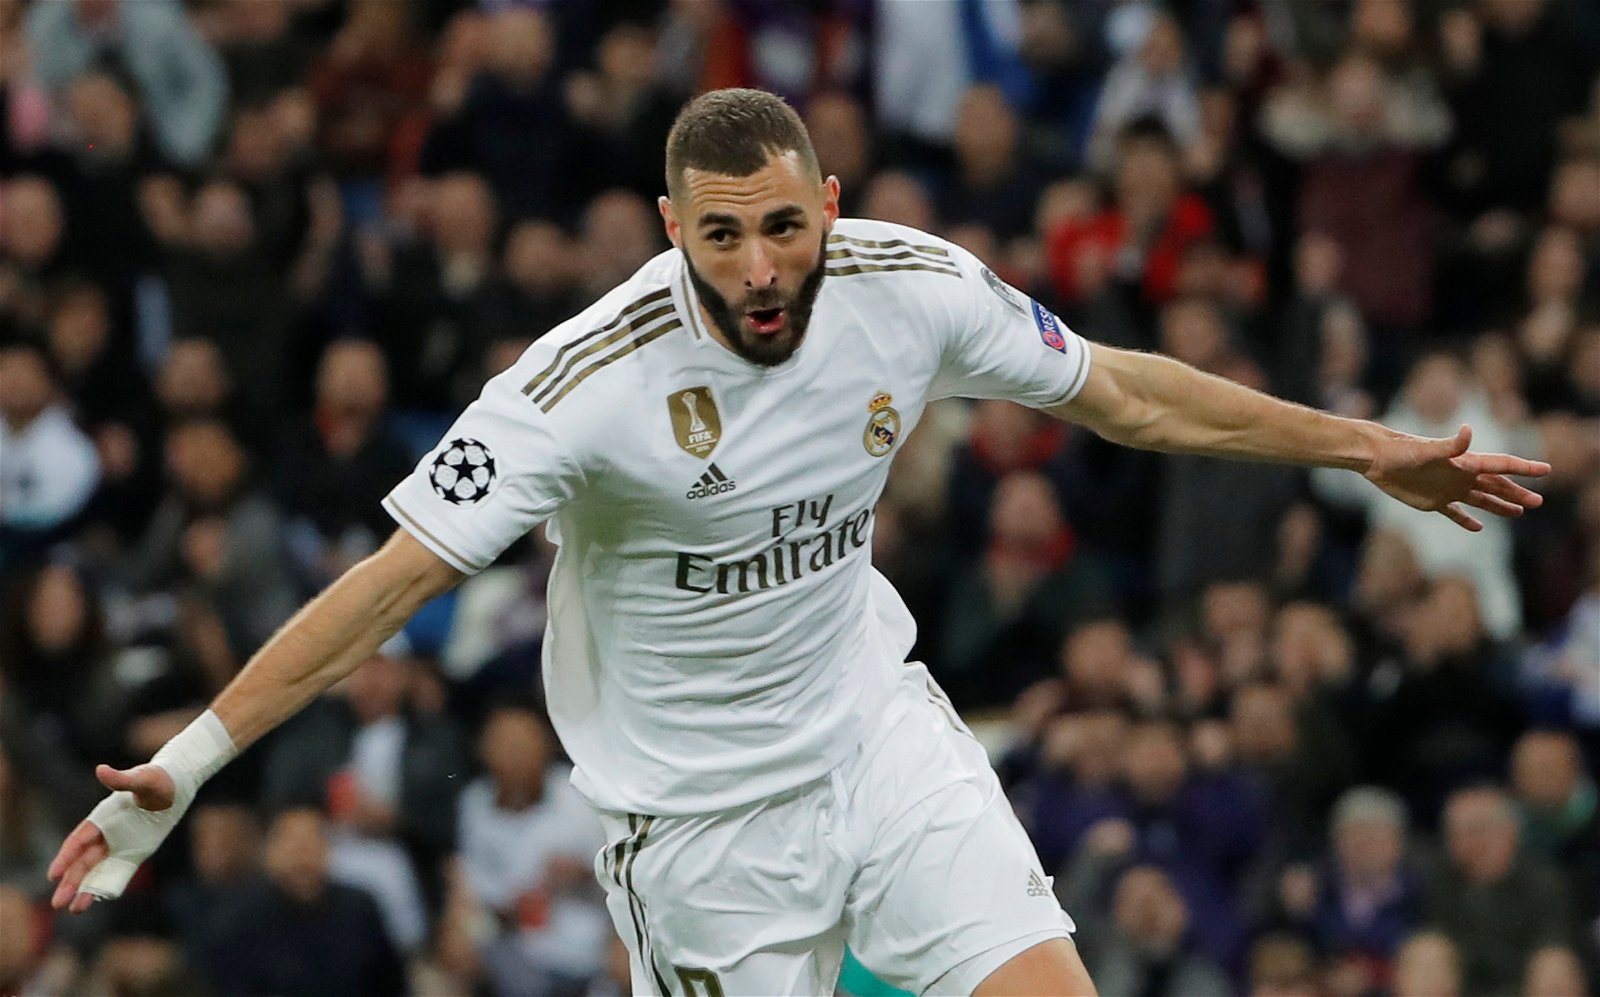 Benzema's backheel assist is one of the plays of this season - Zidane